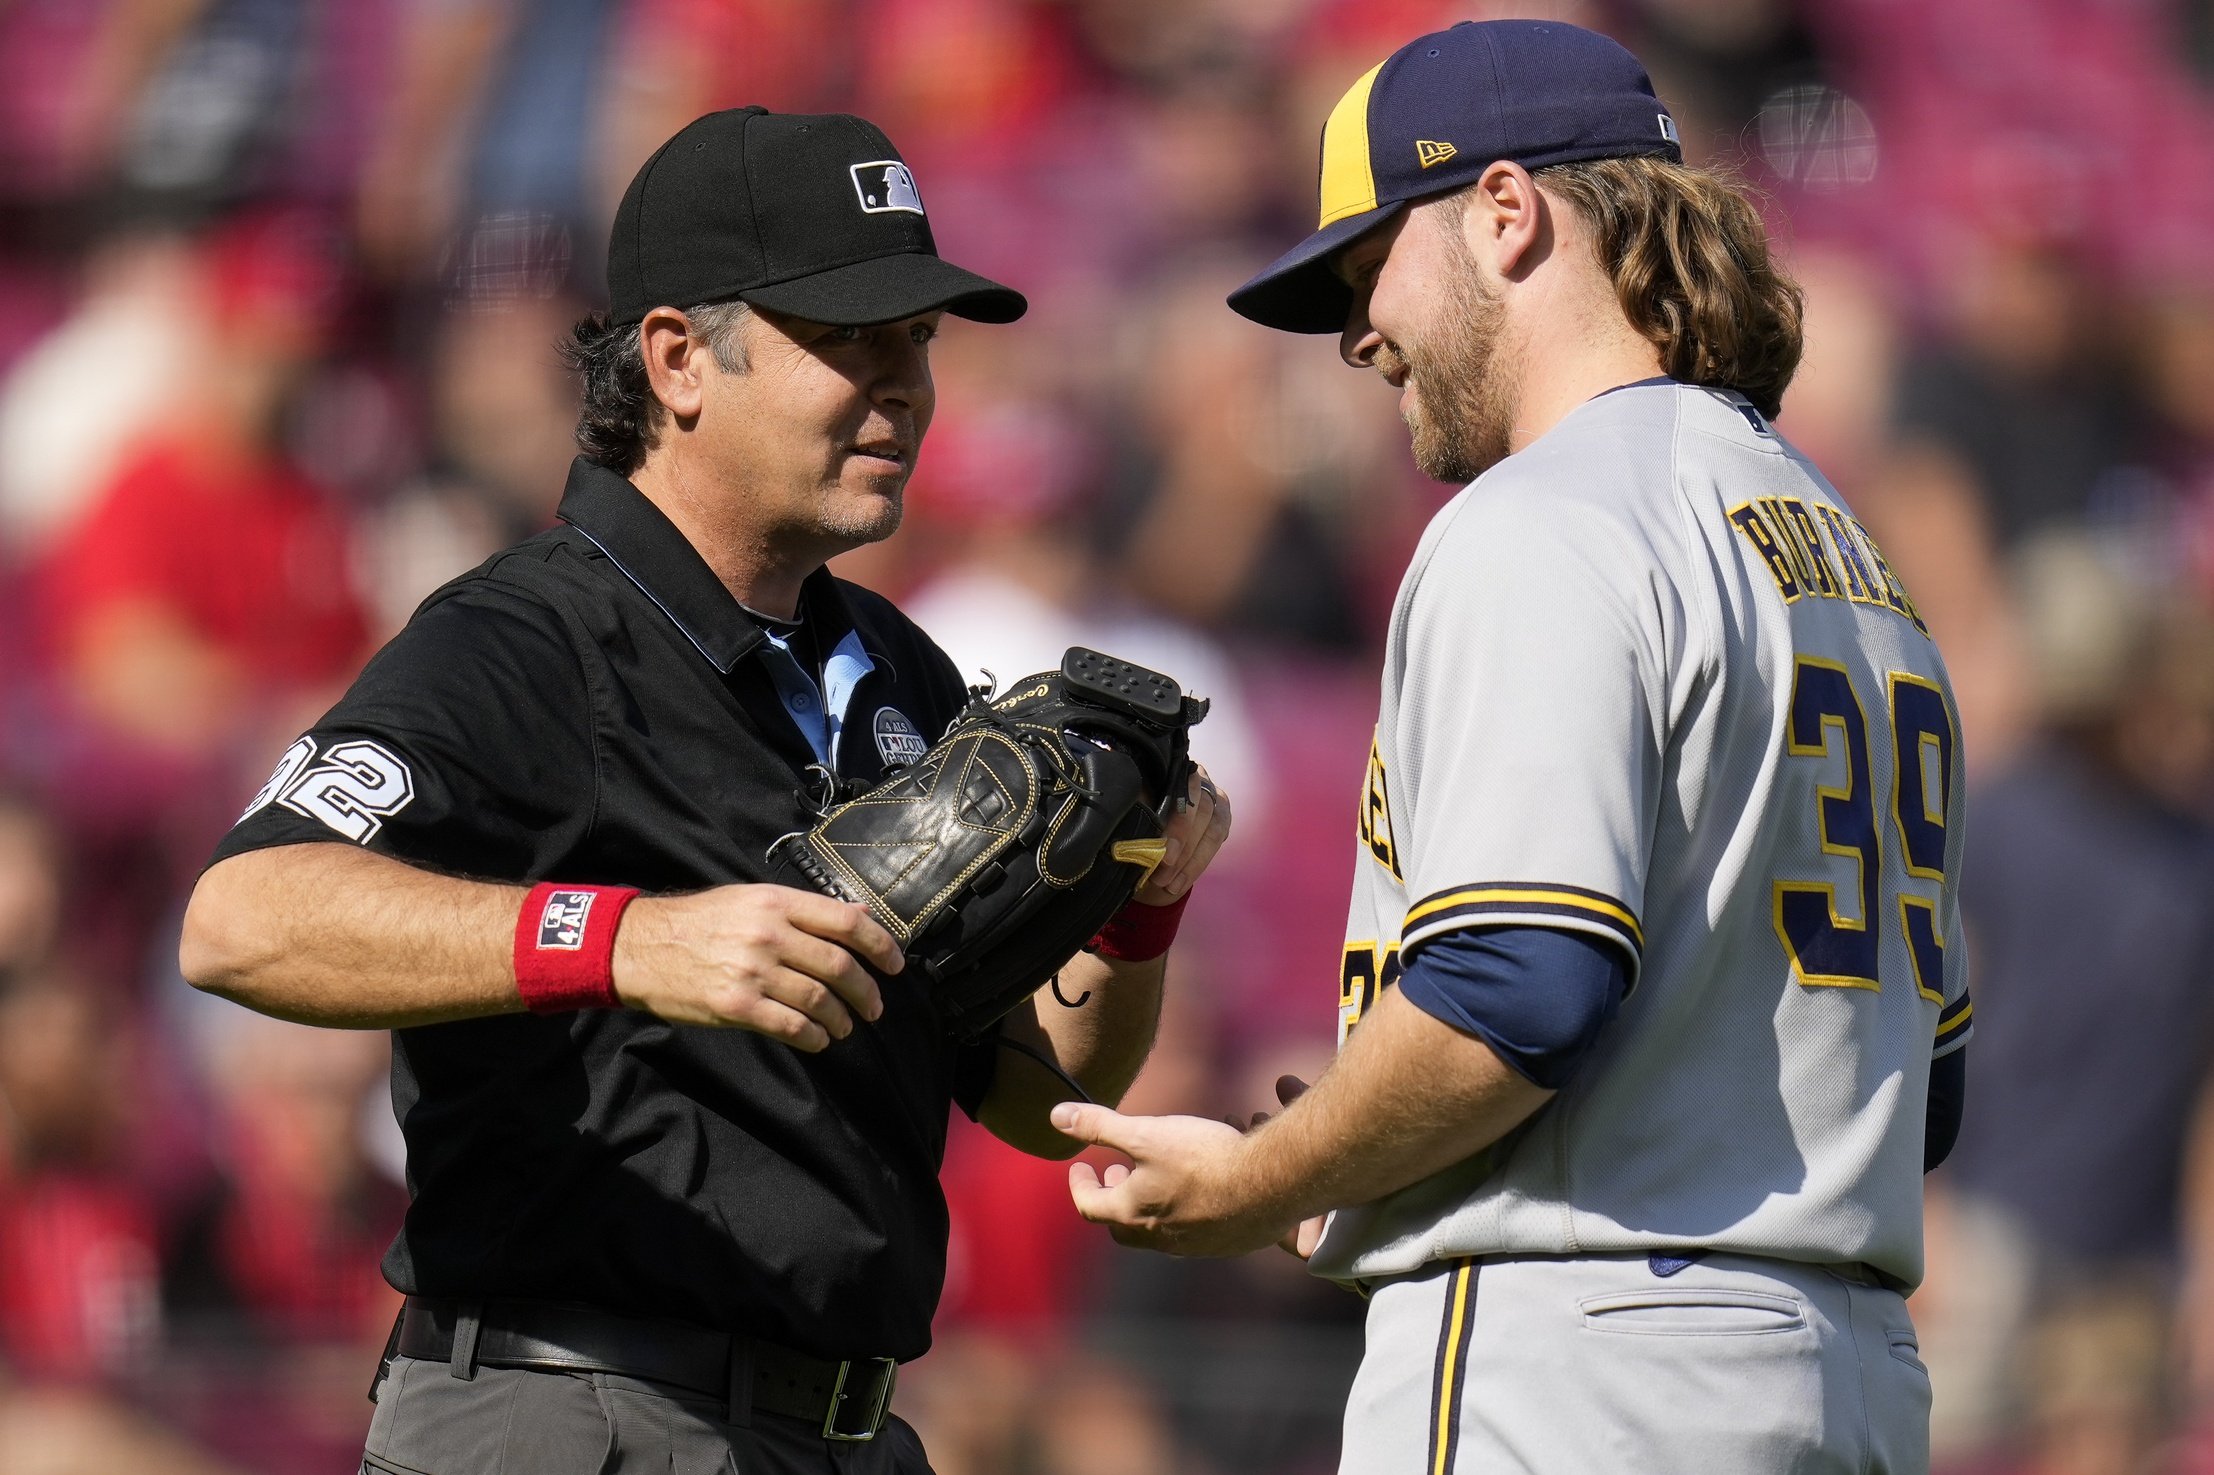 Milwaukee Brewers In Trouble As Trade Deadline Approaches - The